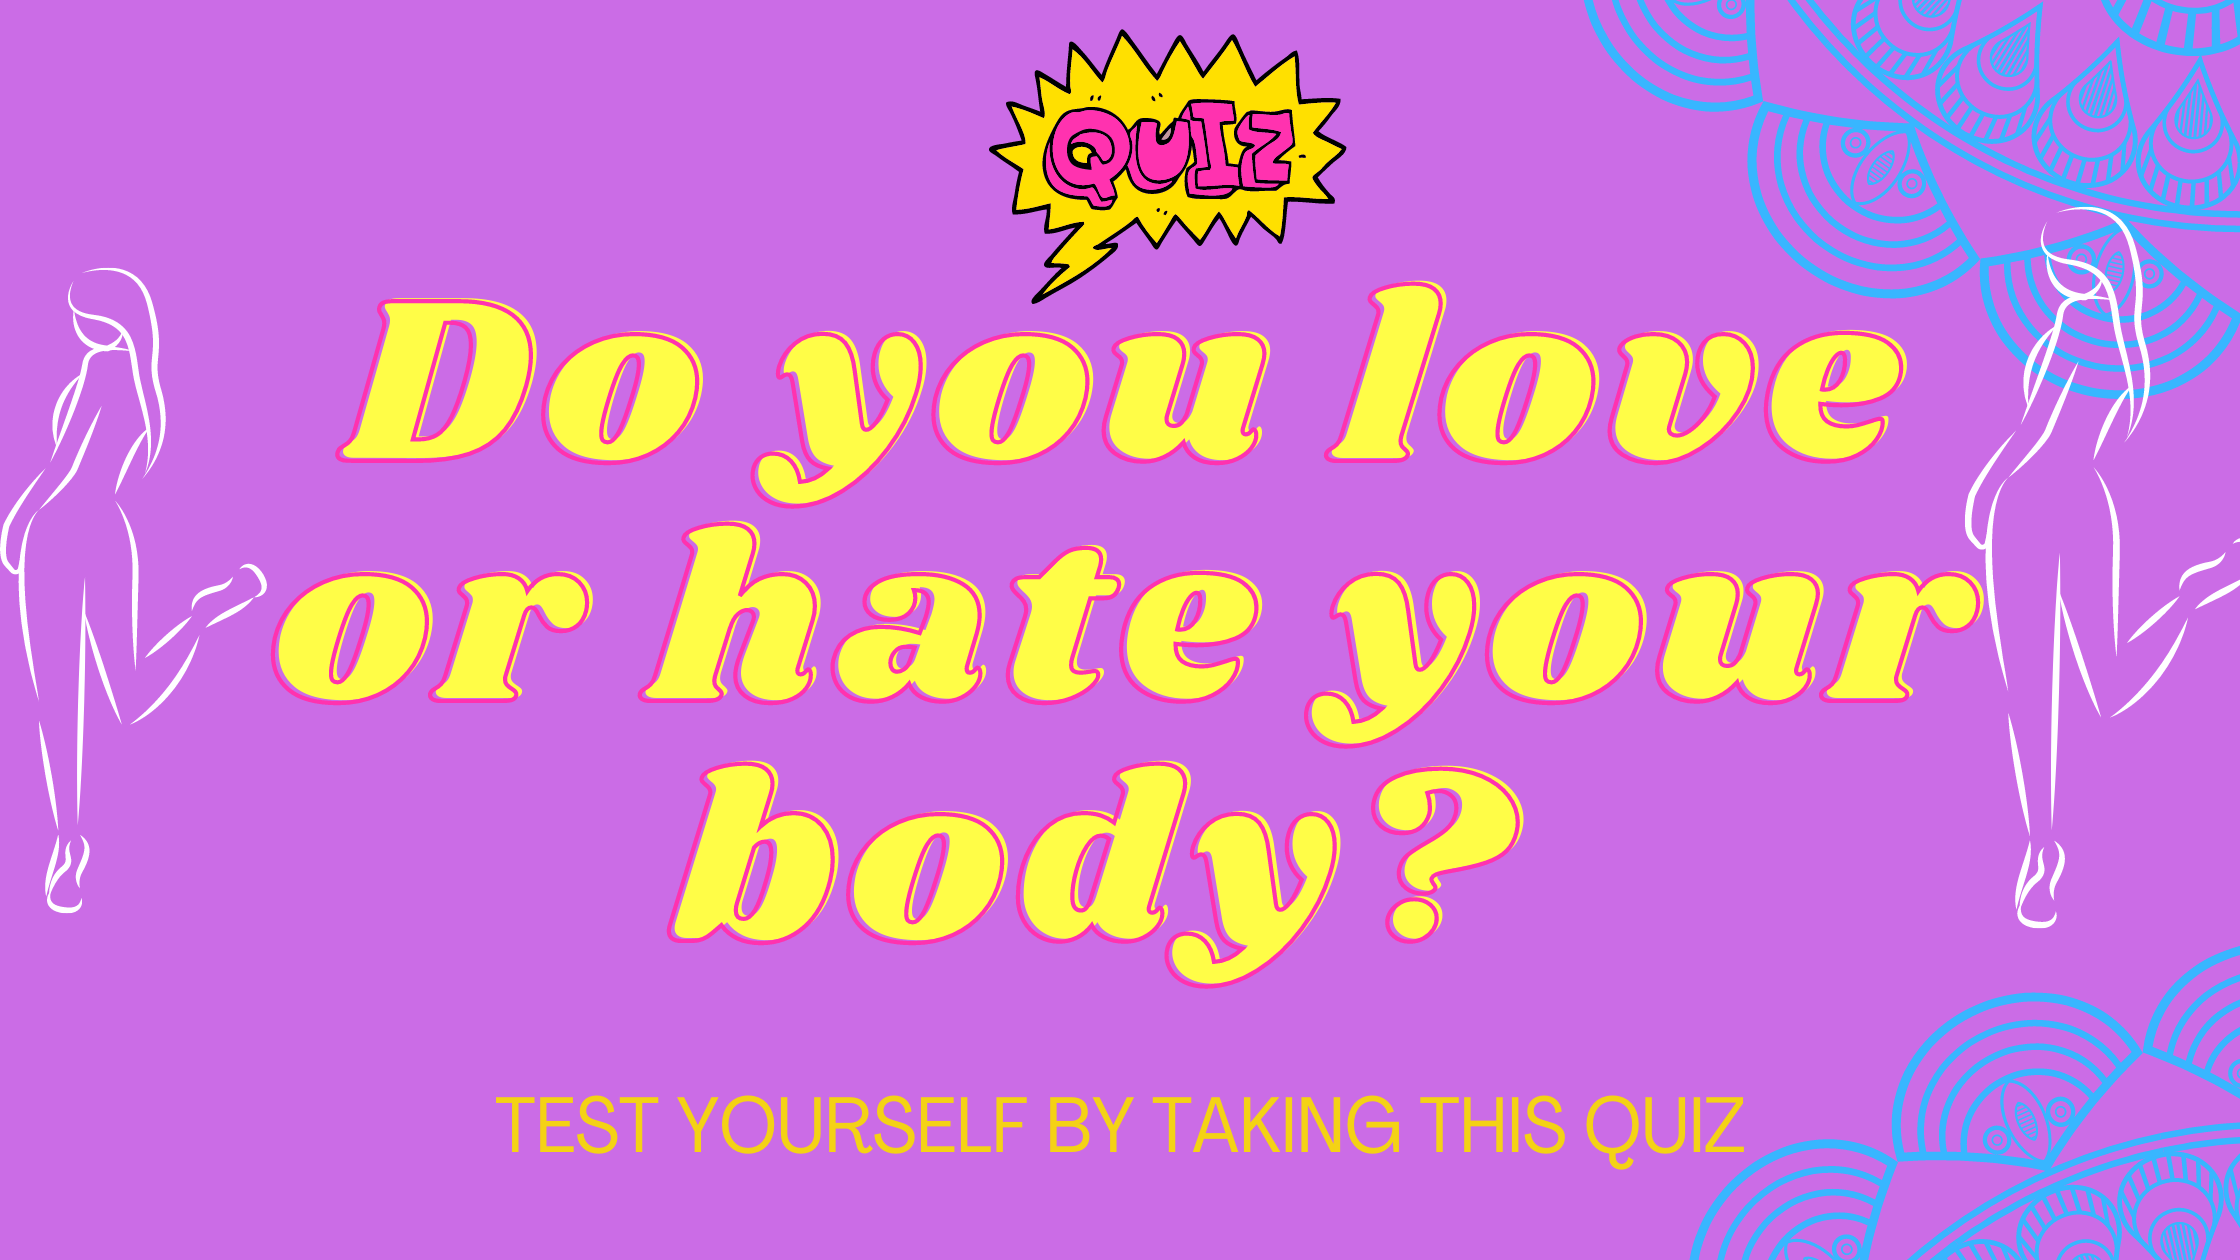 Do you love or hate your body?